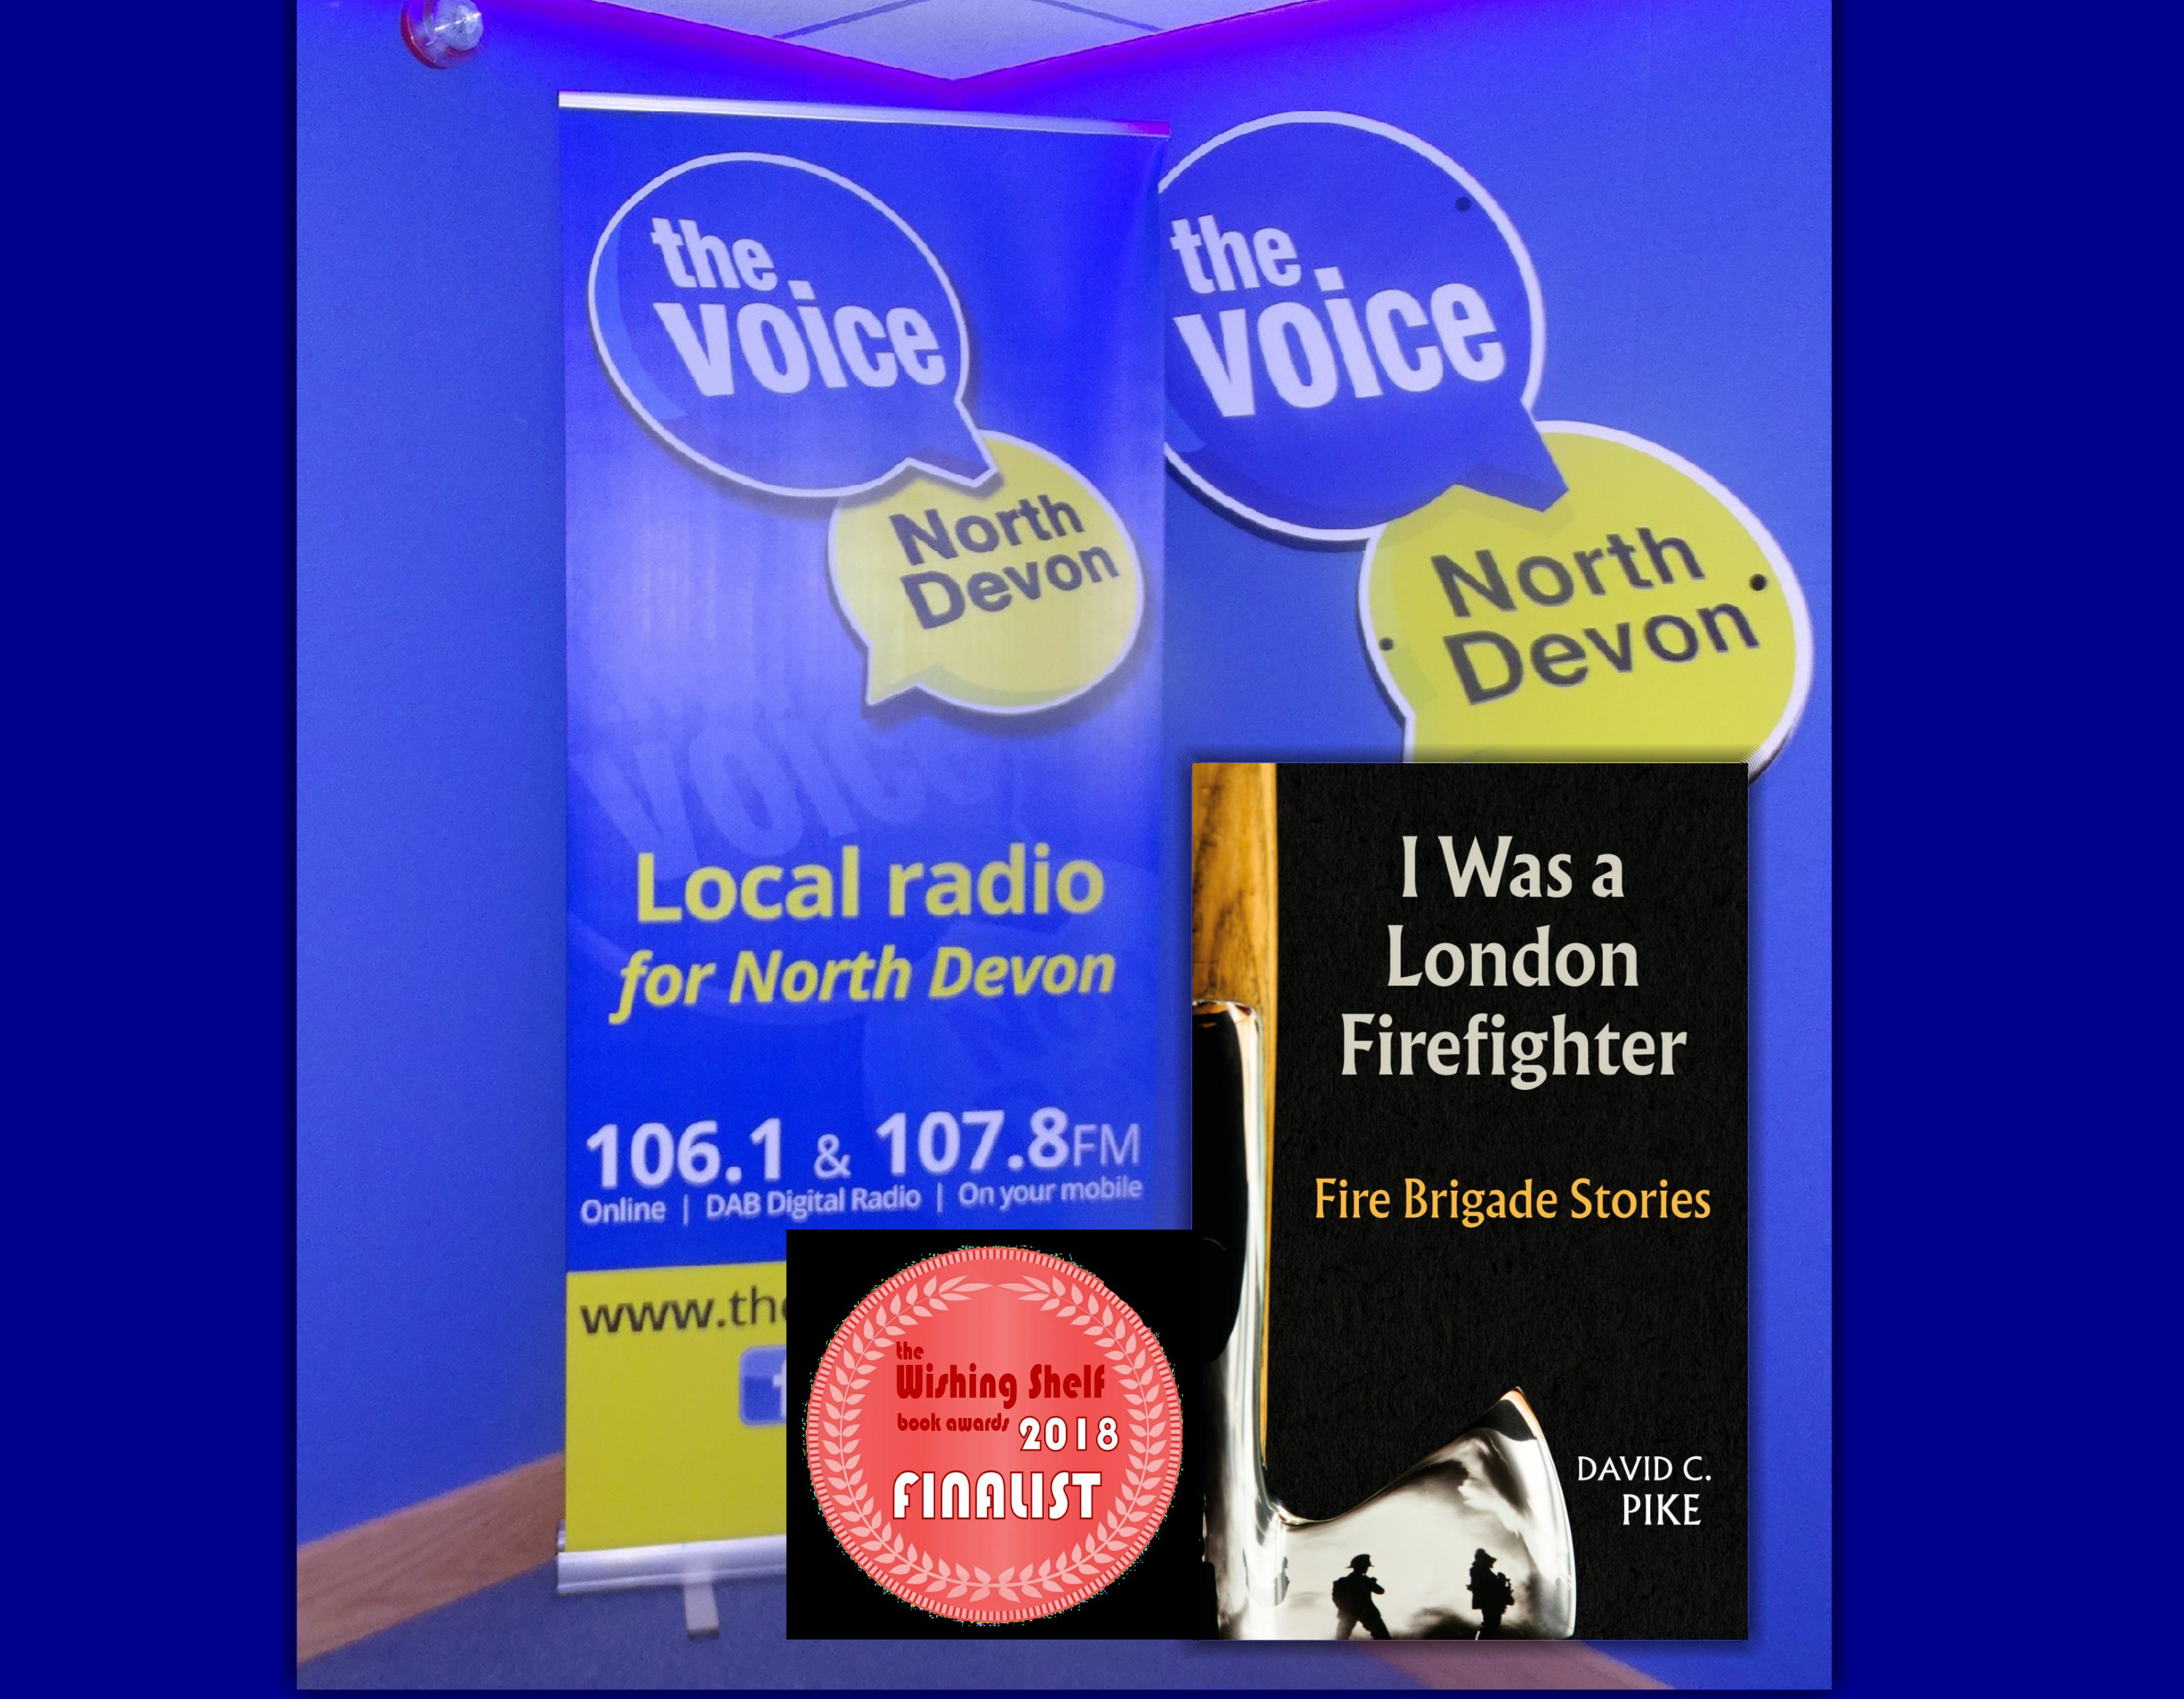 Radio Interview of David C. Pike, the author of ‘I Was a London Firefighter’